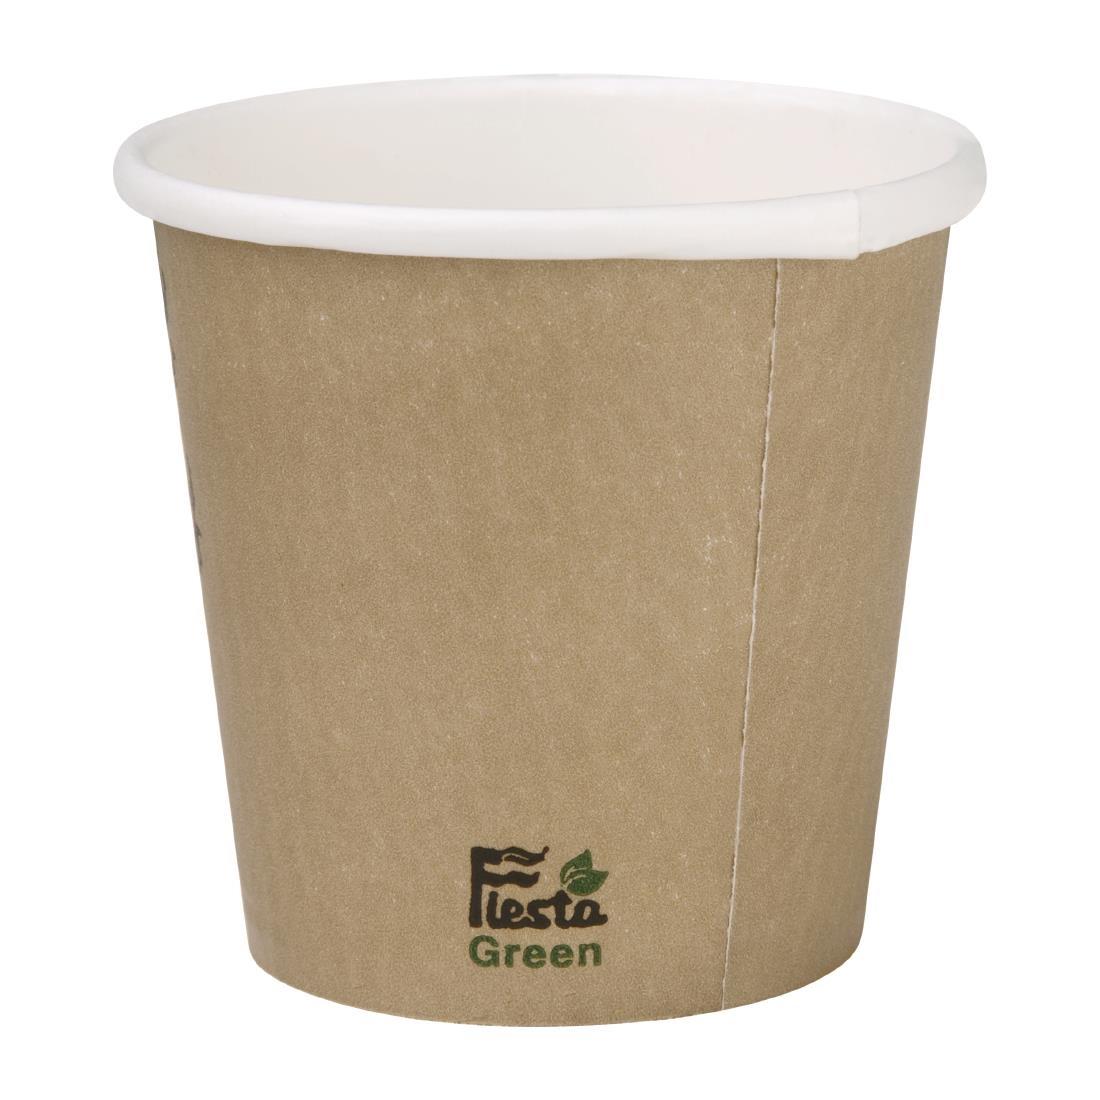 Fiesta Compostable Espresso Cups Single Wall 113ml / 4oz (Pack of 50) - DY980  - 2